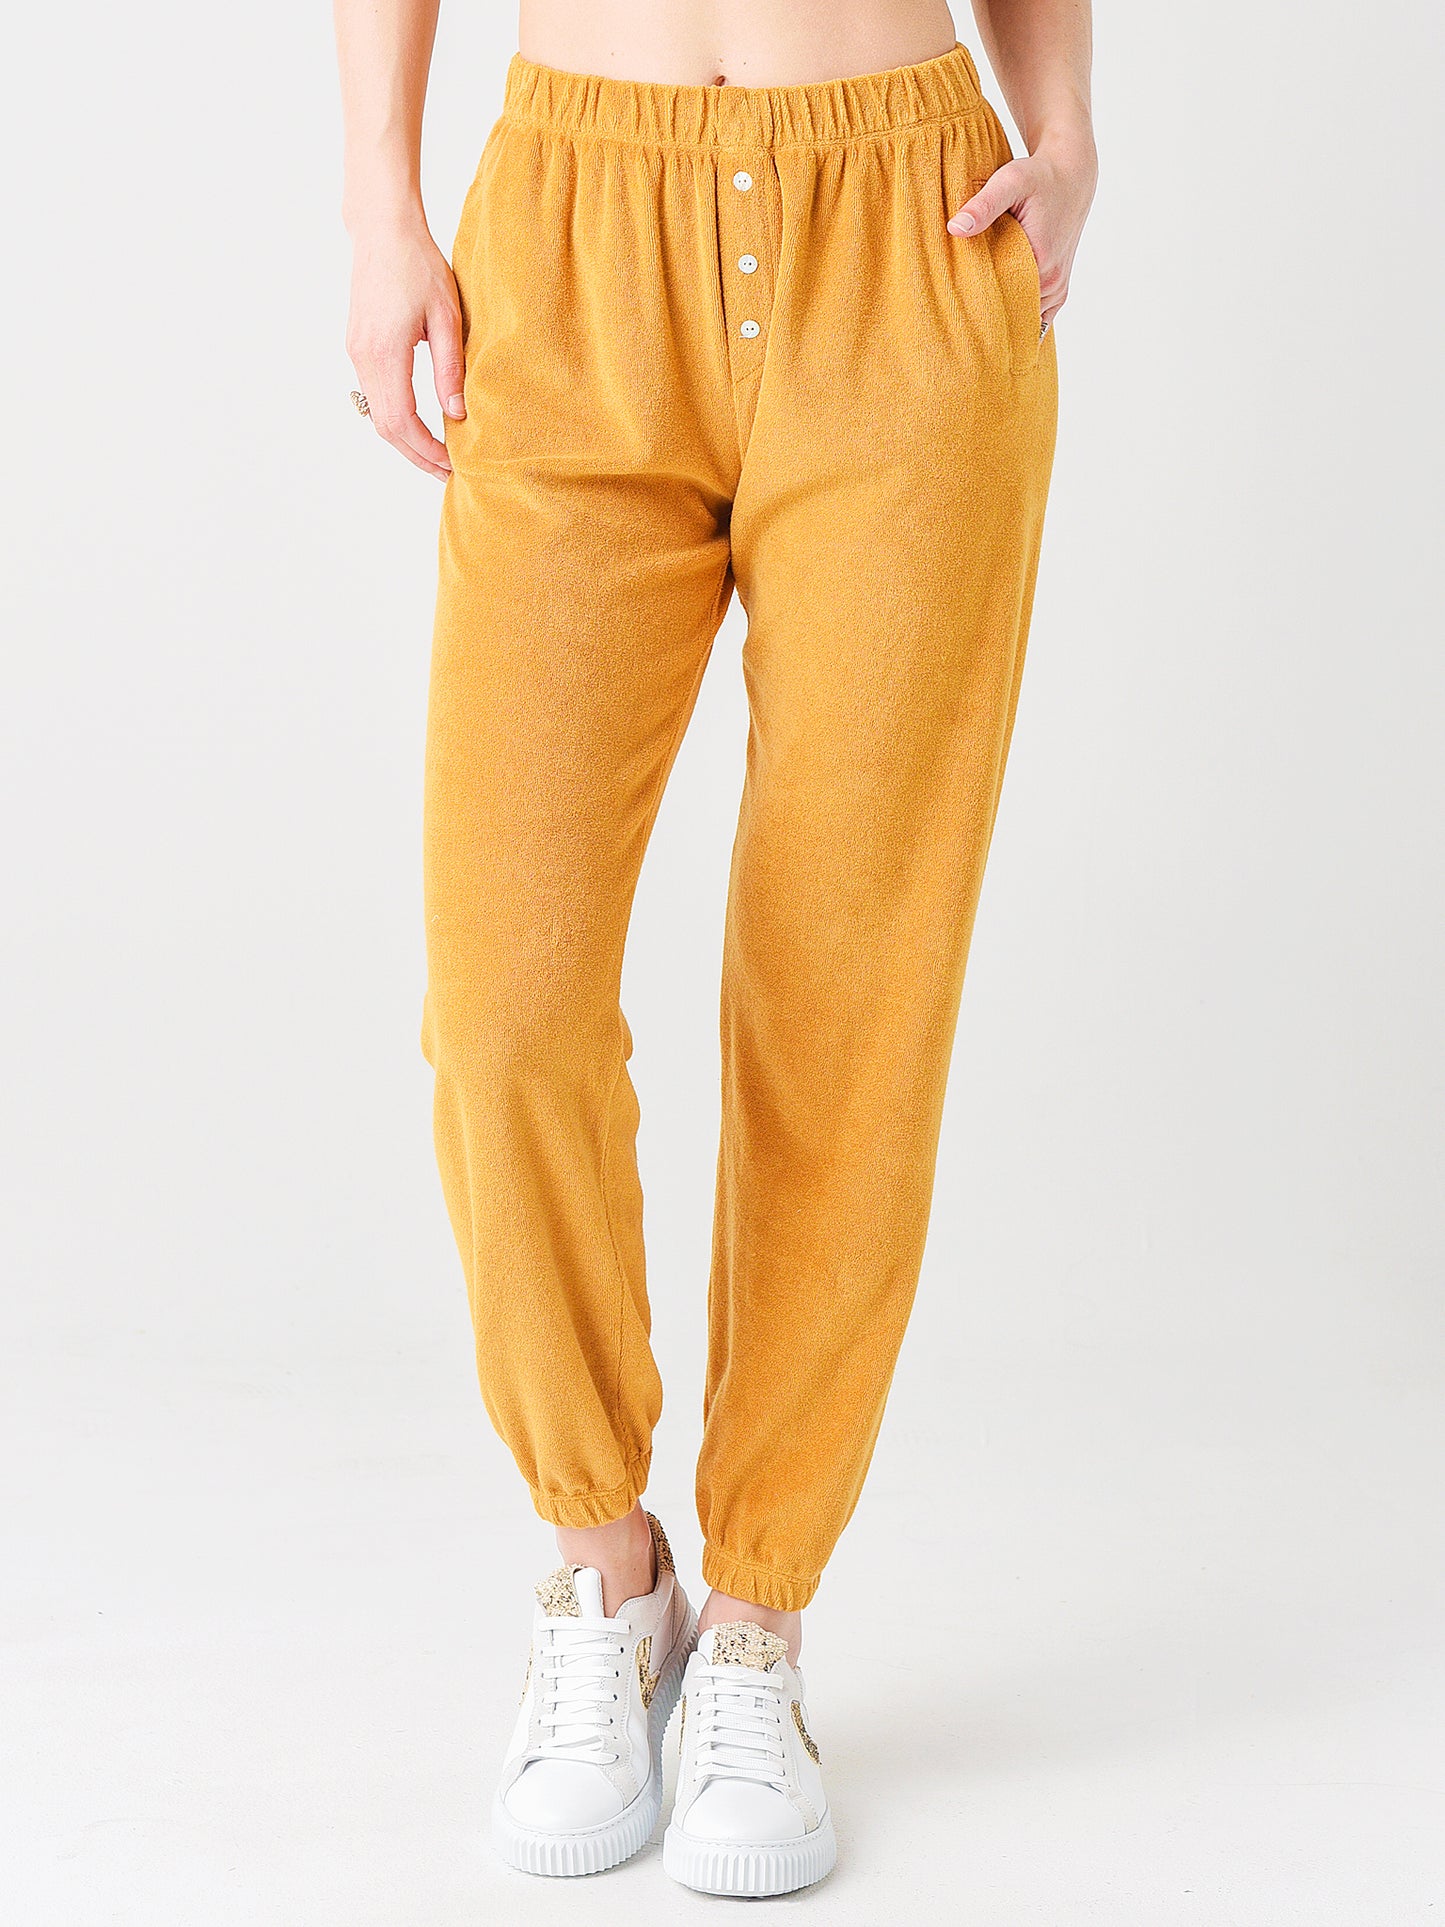 DONNI. Women's The Terry Henley Sweatpant